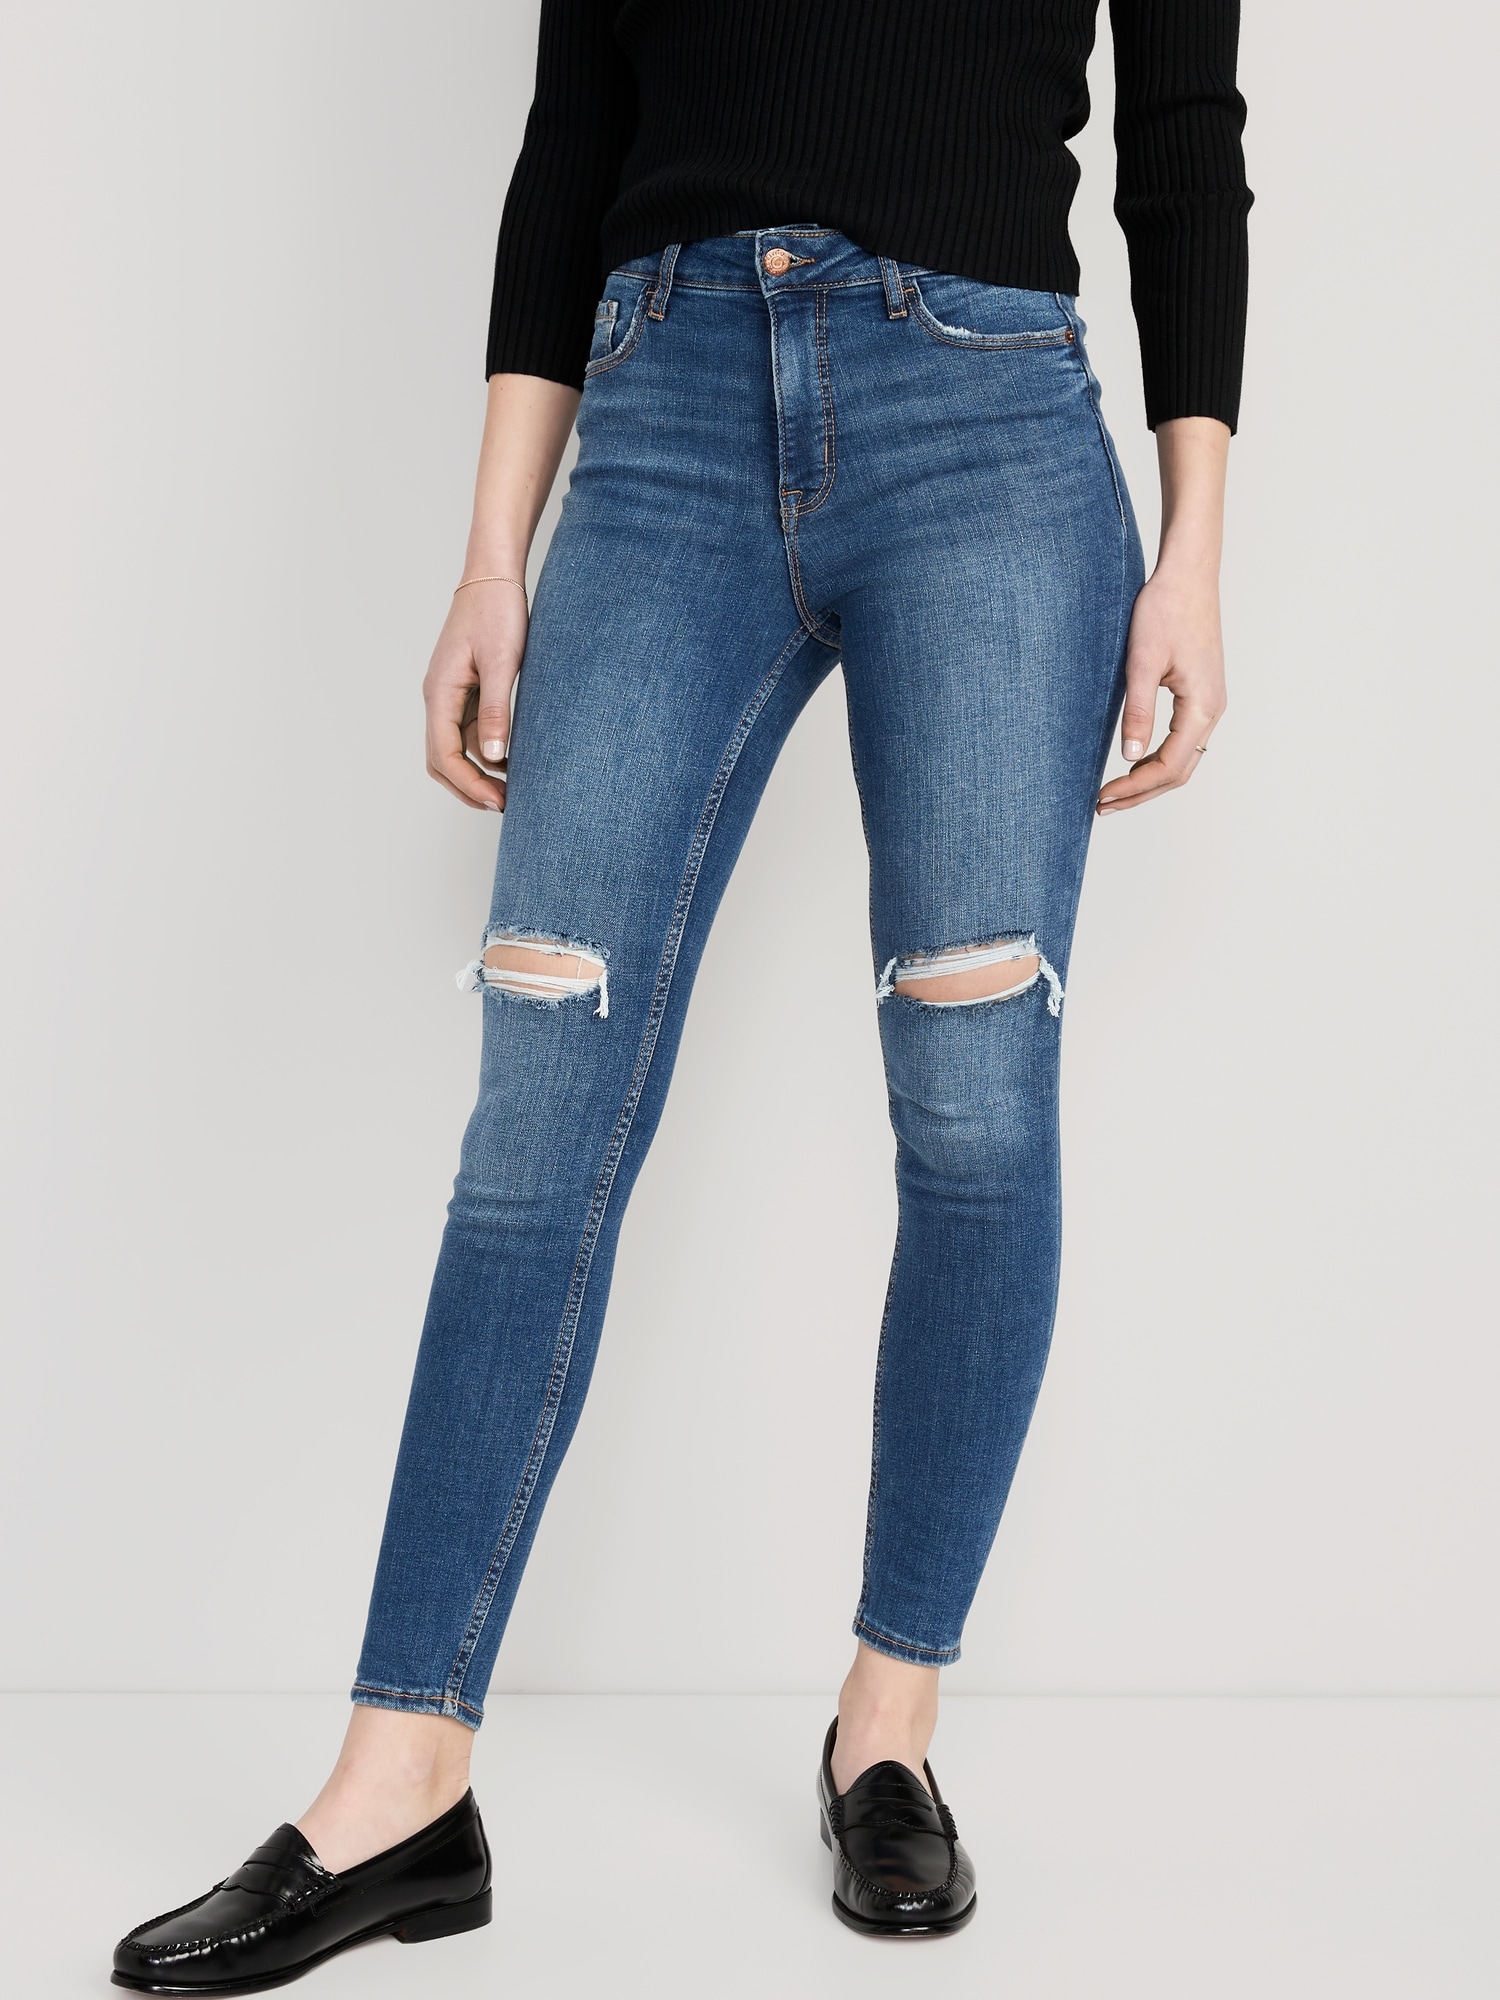 High Waisted Jeans Outfits for Every Body Type-saigonsouth.com.vn